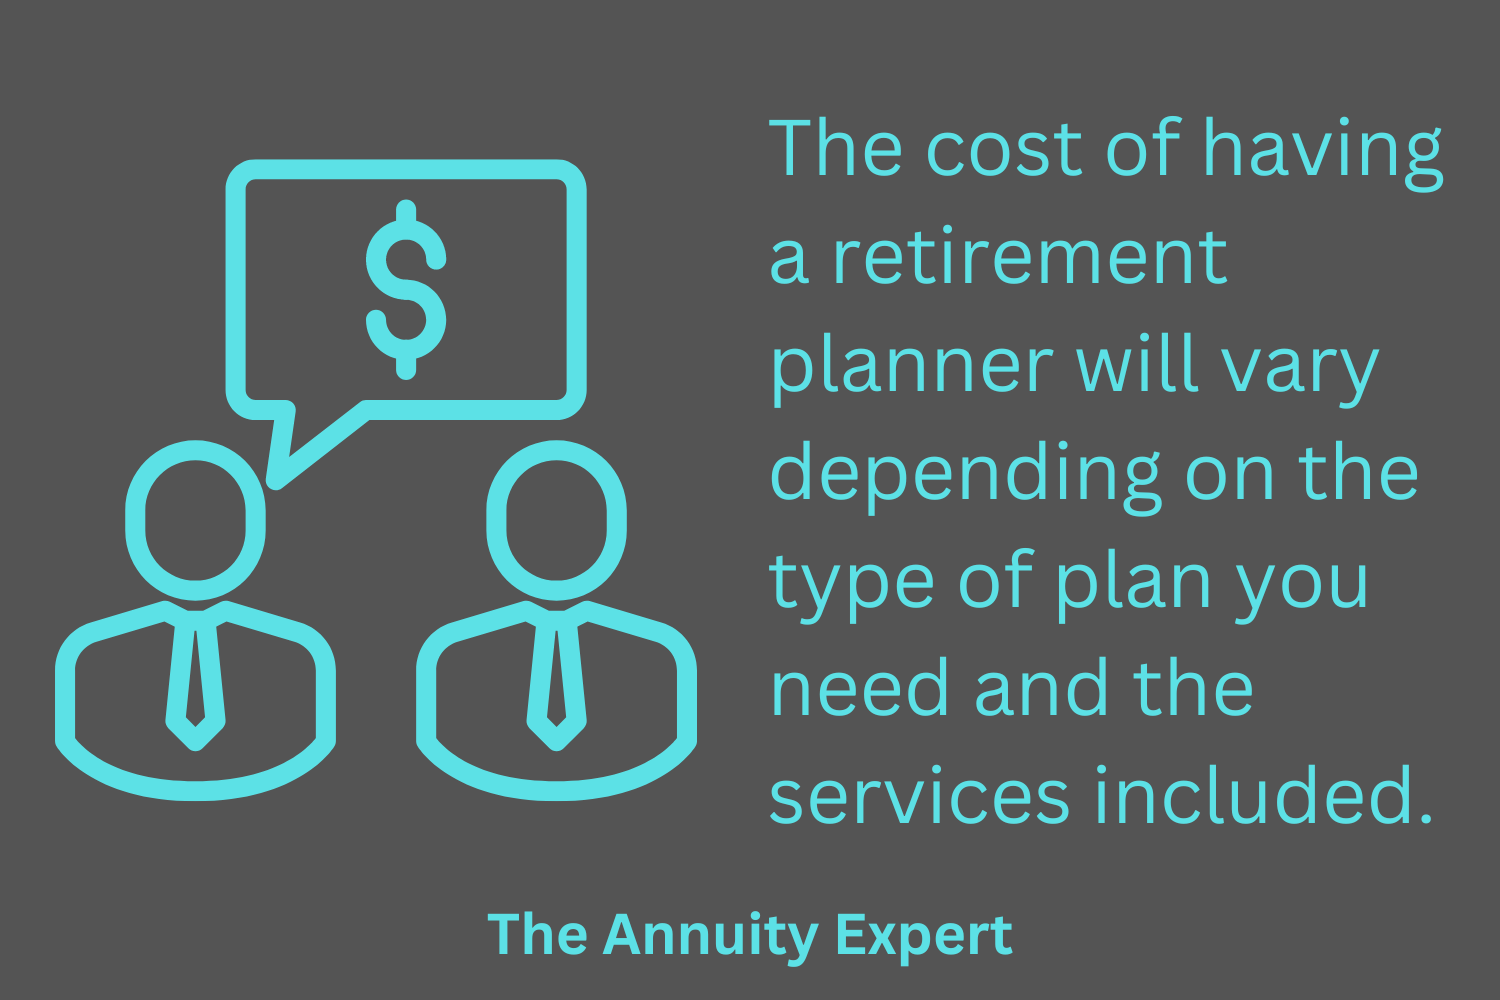 How Much Does It Cost To Have A Retirement Planner?